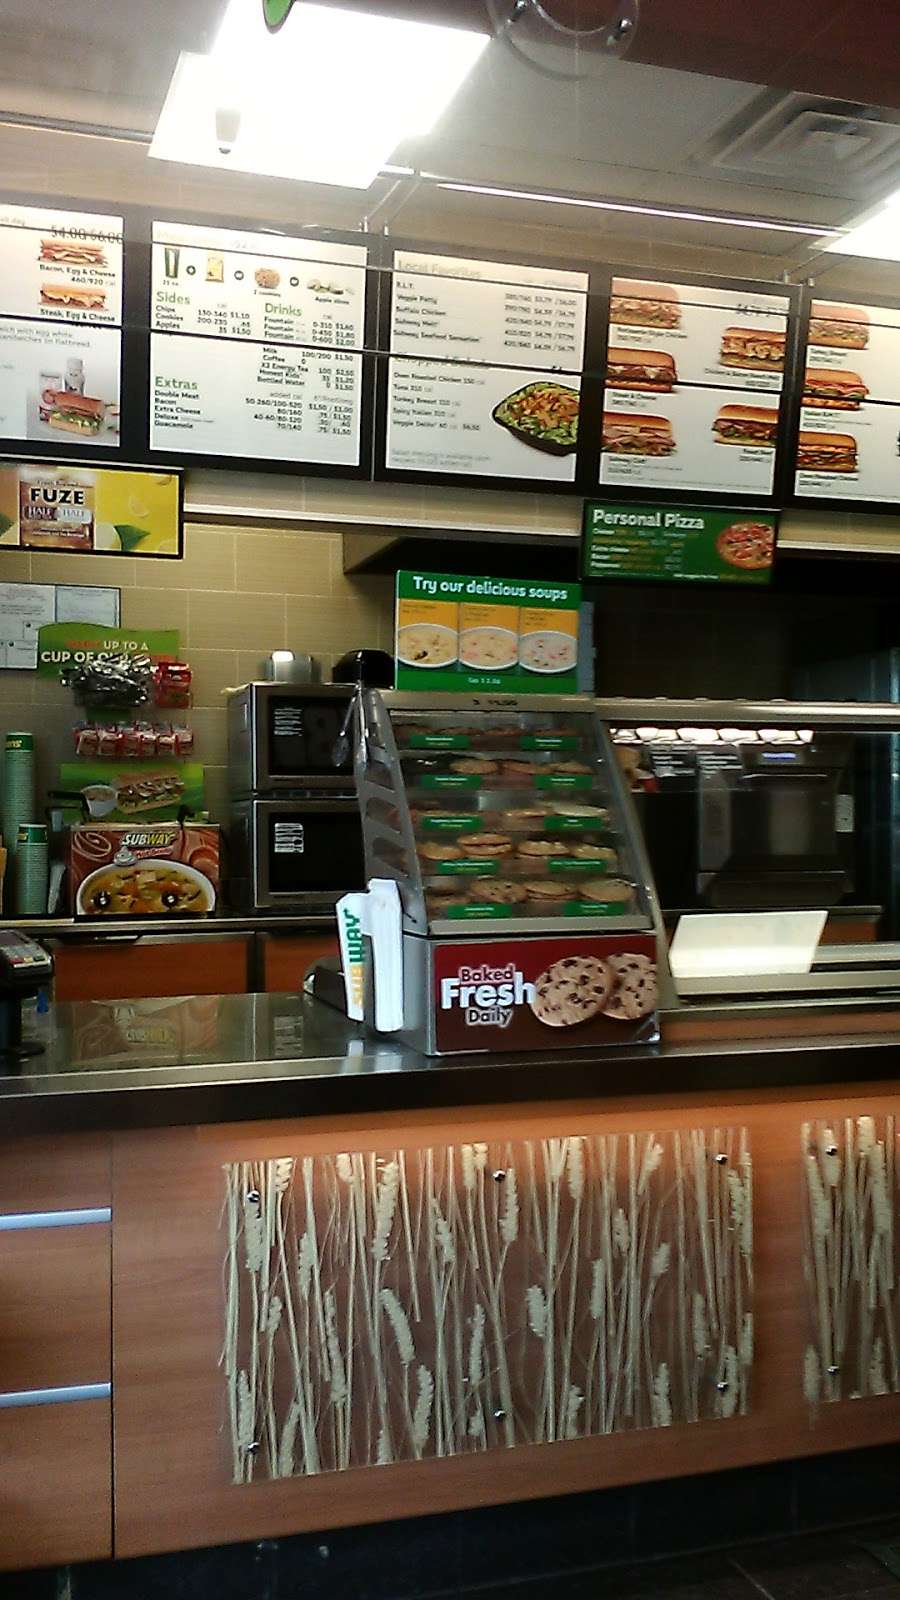 Subway Restaurants | 10327 S Torrence Ave Space #2, Chicago, IL 60617 | Phone: (773) 902-7188